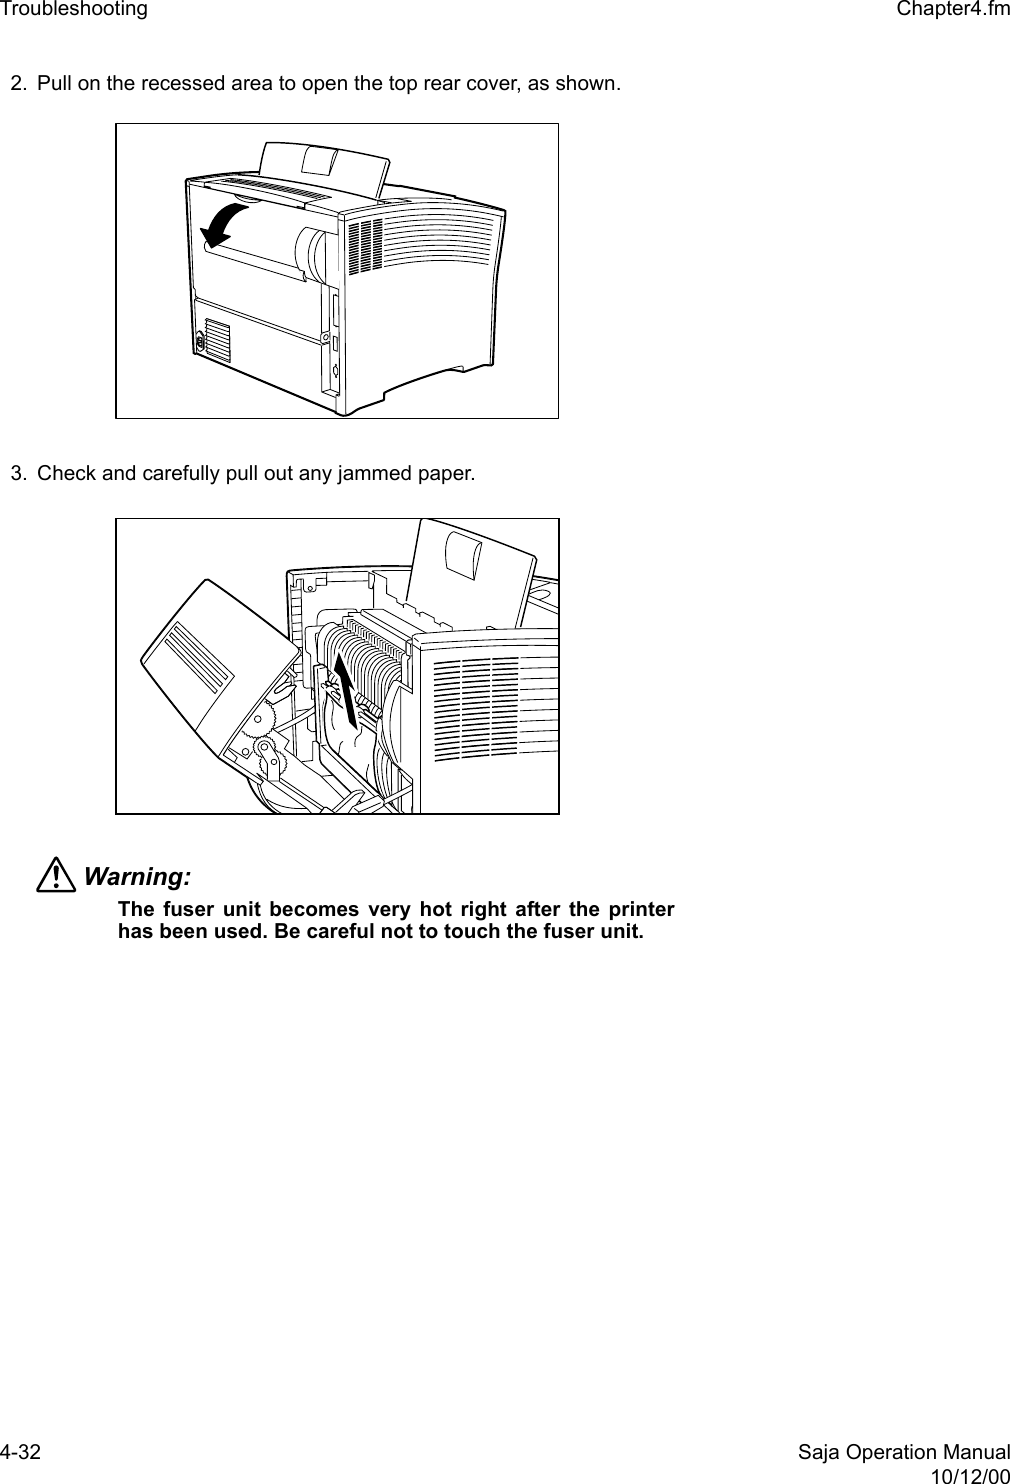 4-32 Saja Operation Manual10/12/00Troubleshooting  Chapter4.fm2. Pull on the recessed area to open the top rear cover, as shown. 3. Check and carefully pull out any jammed paper. Warning: The fuser unit becomes very hot right after the printerhas been used. Be careful not to touch the fuser unit.